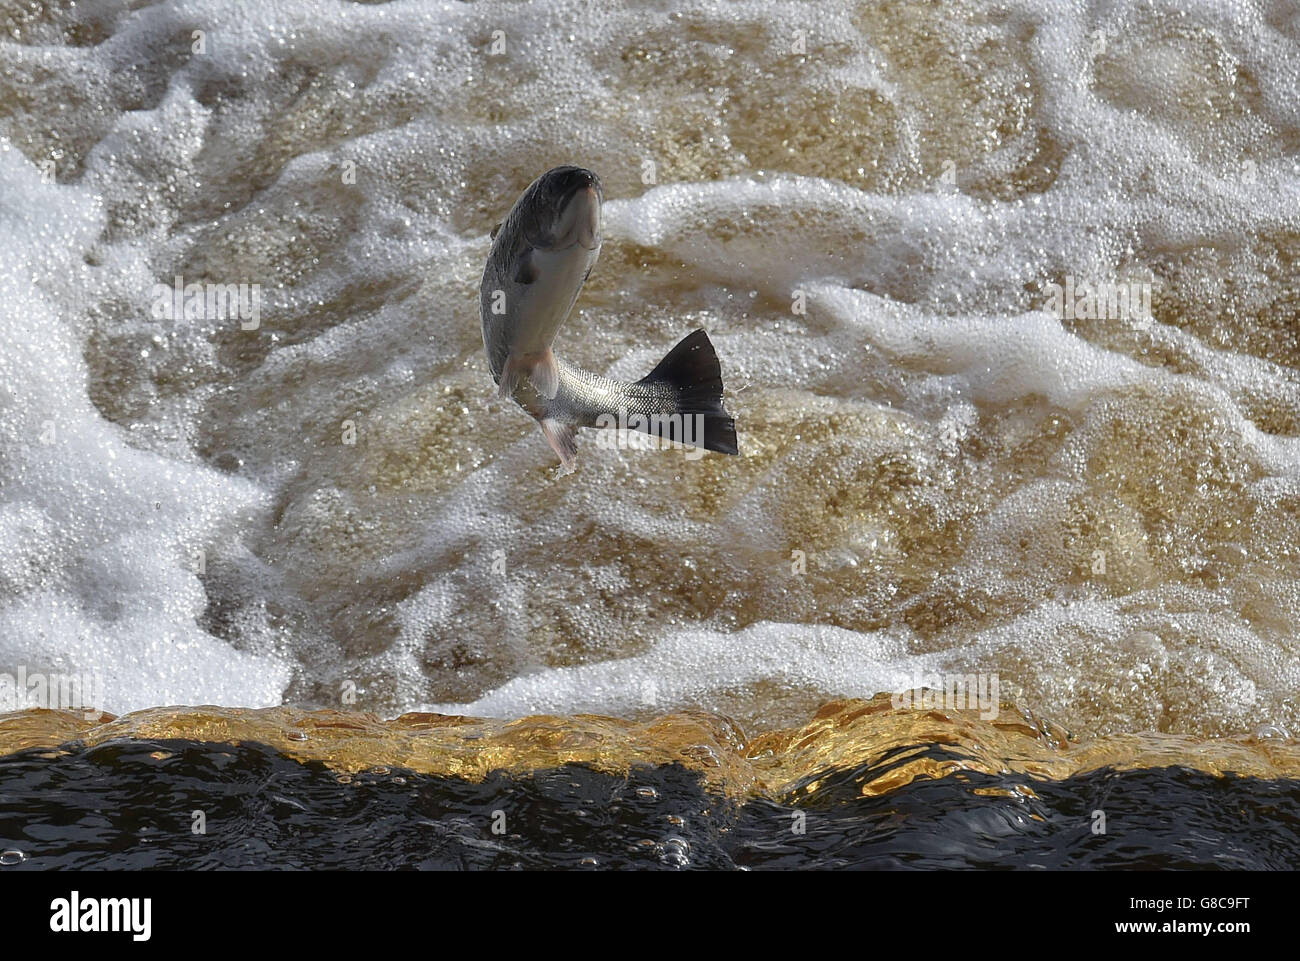 Sea trout in the Tyne. Sea trout jump up a wear wall at Hexham in Northumberland on their migration up the River Tyne. Stock Photo